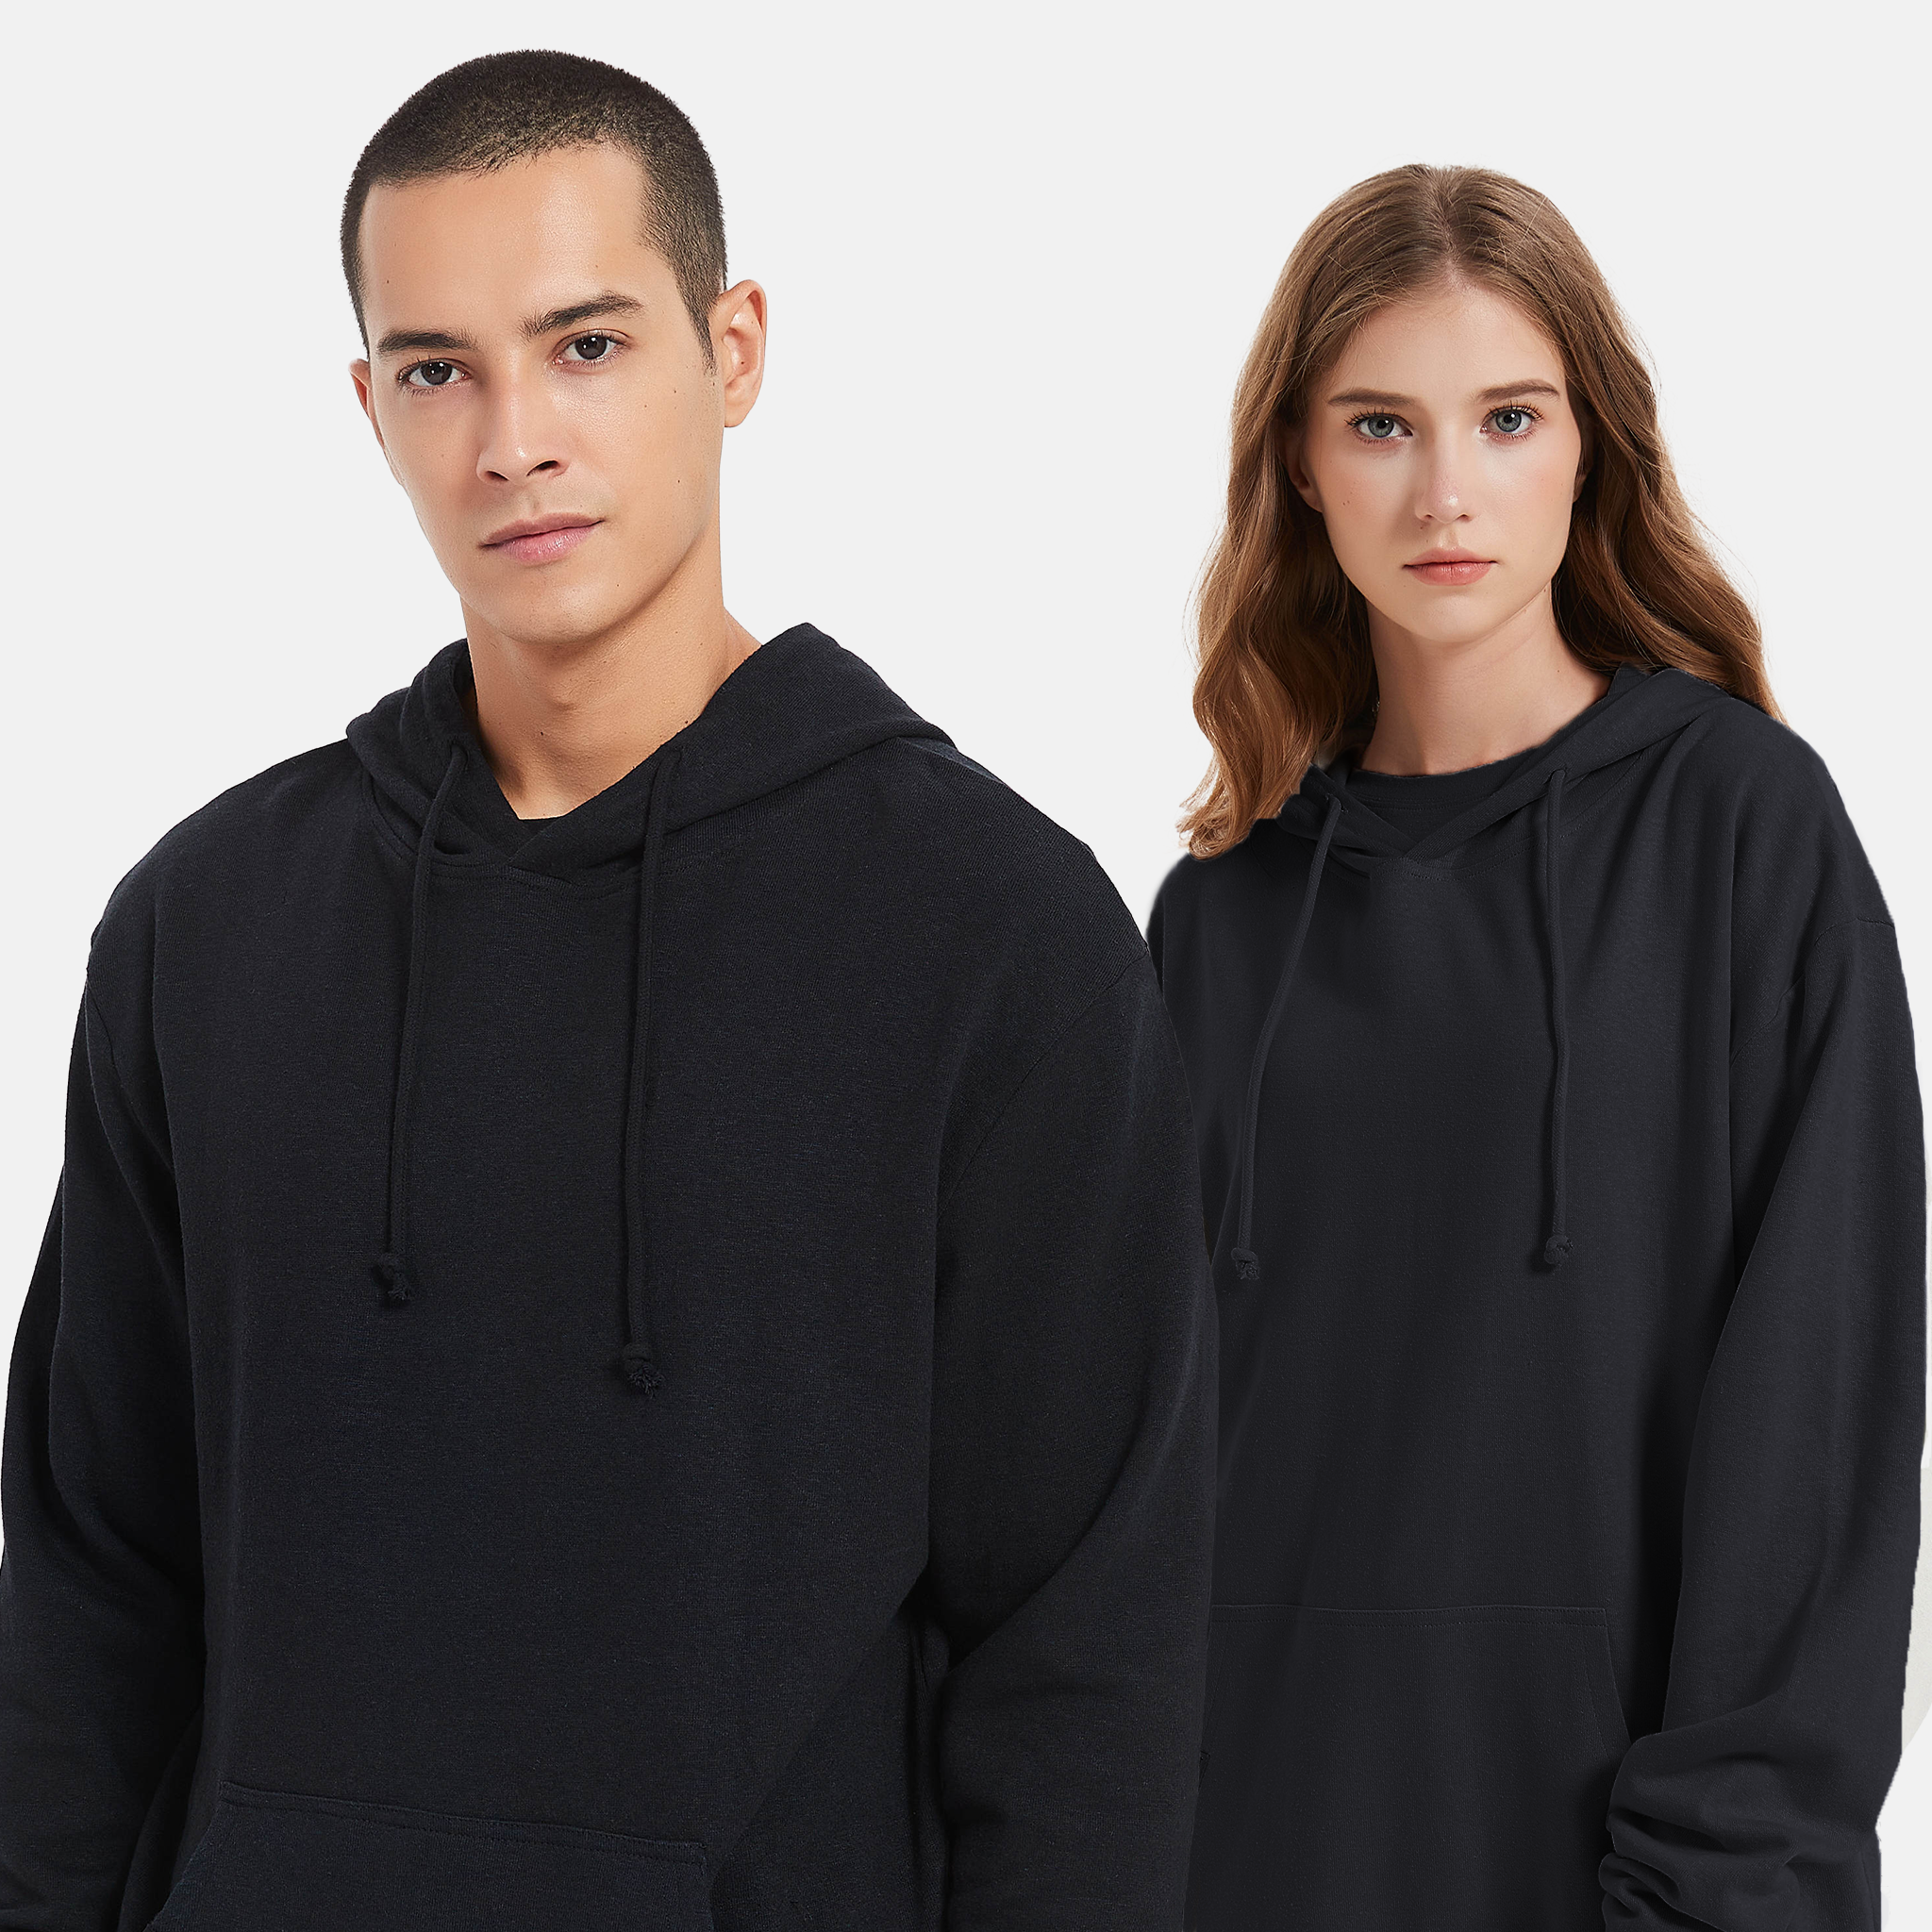 Black eco-hoodie, Sustainable style made with planet-friendly materials. Unisex